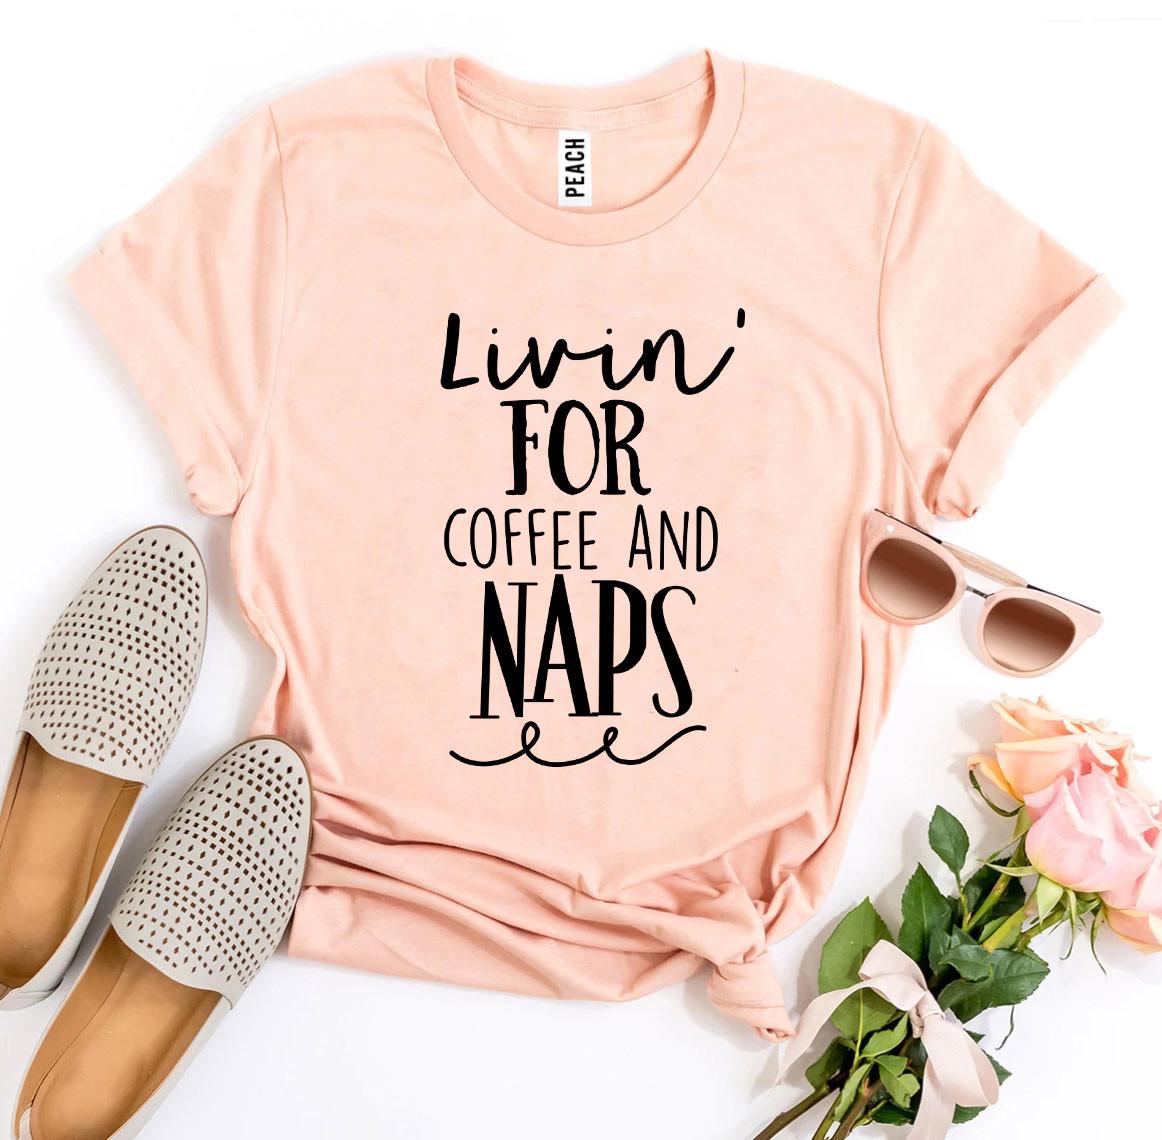 Livin For Coffee And Naps T-shirt